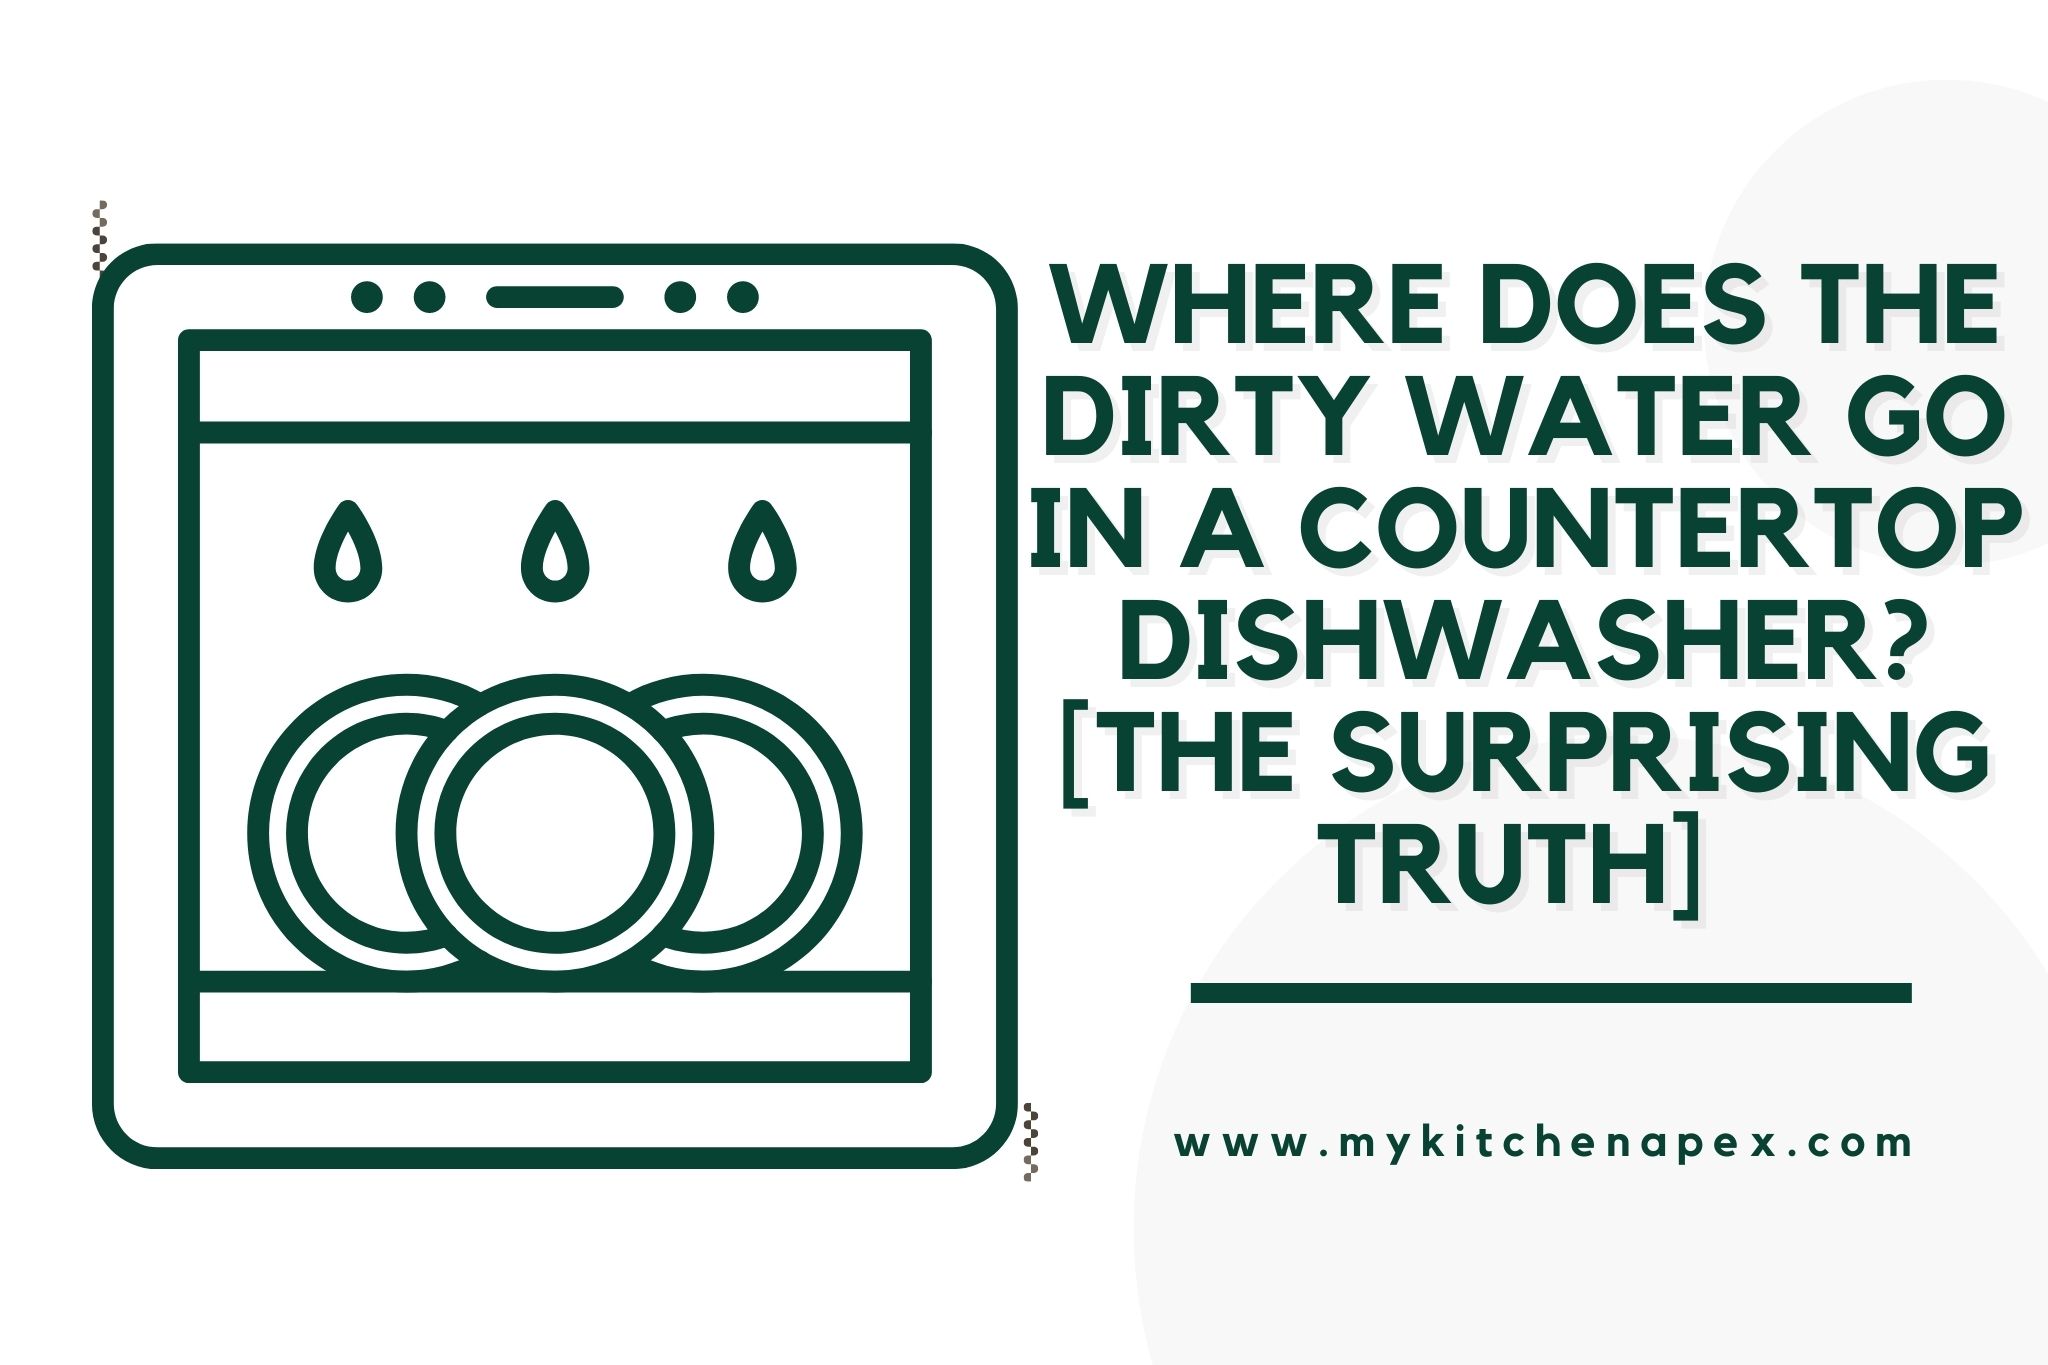 Where Does The Dirty Water Go In A Countertop Dishwasher? [The SURPRISING Truth]